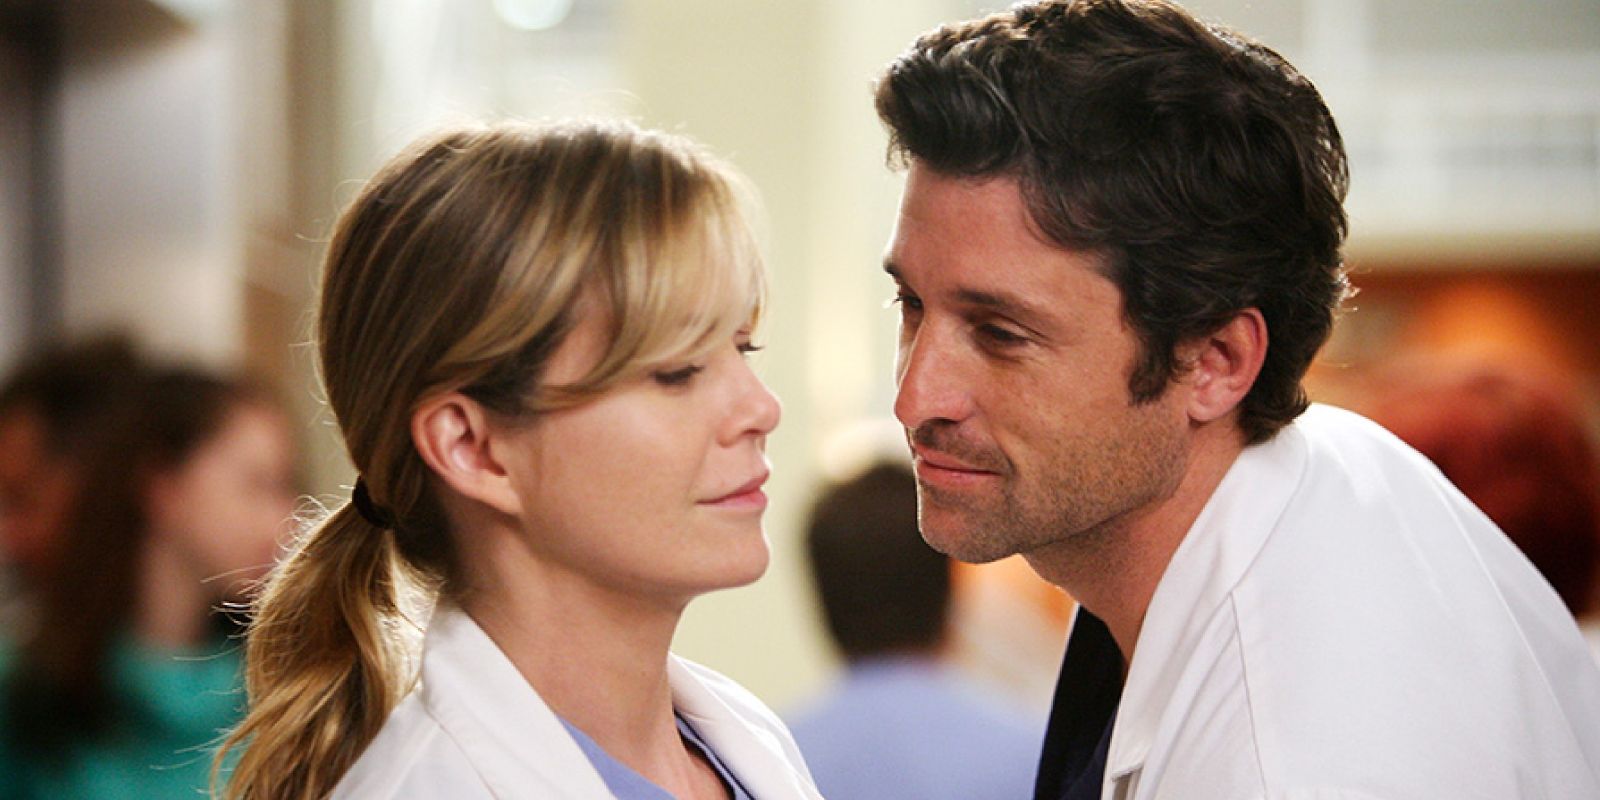 Derek leaning in to kiss a skeptical Meredith in Grey's Anatomy.